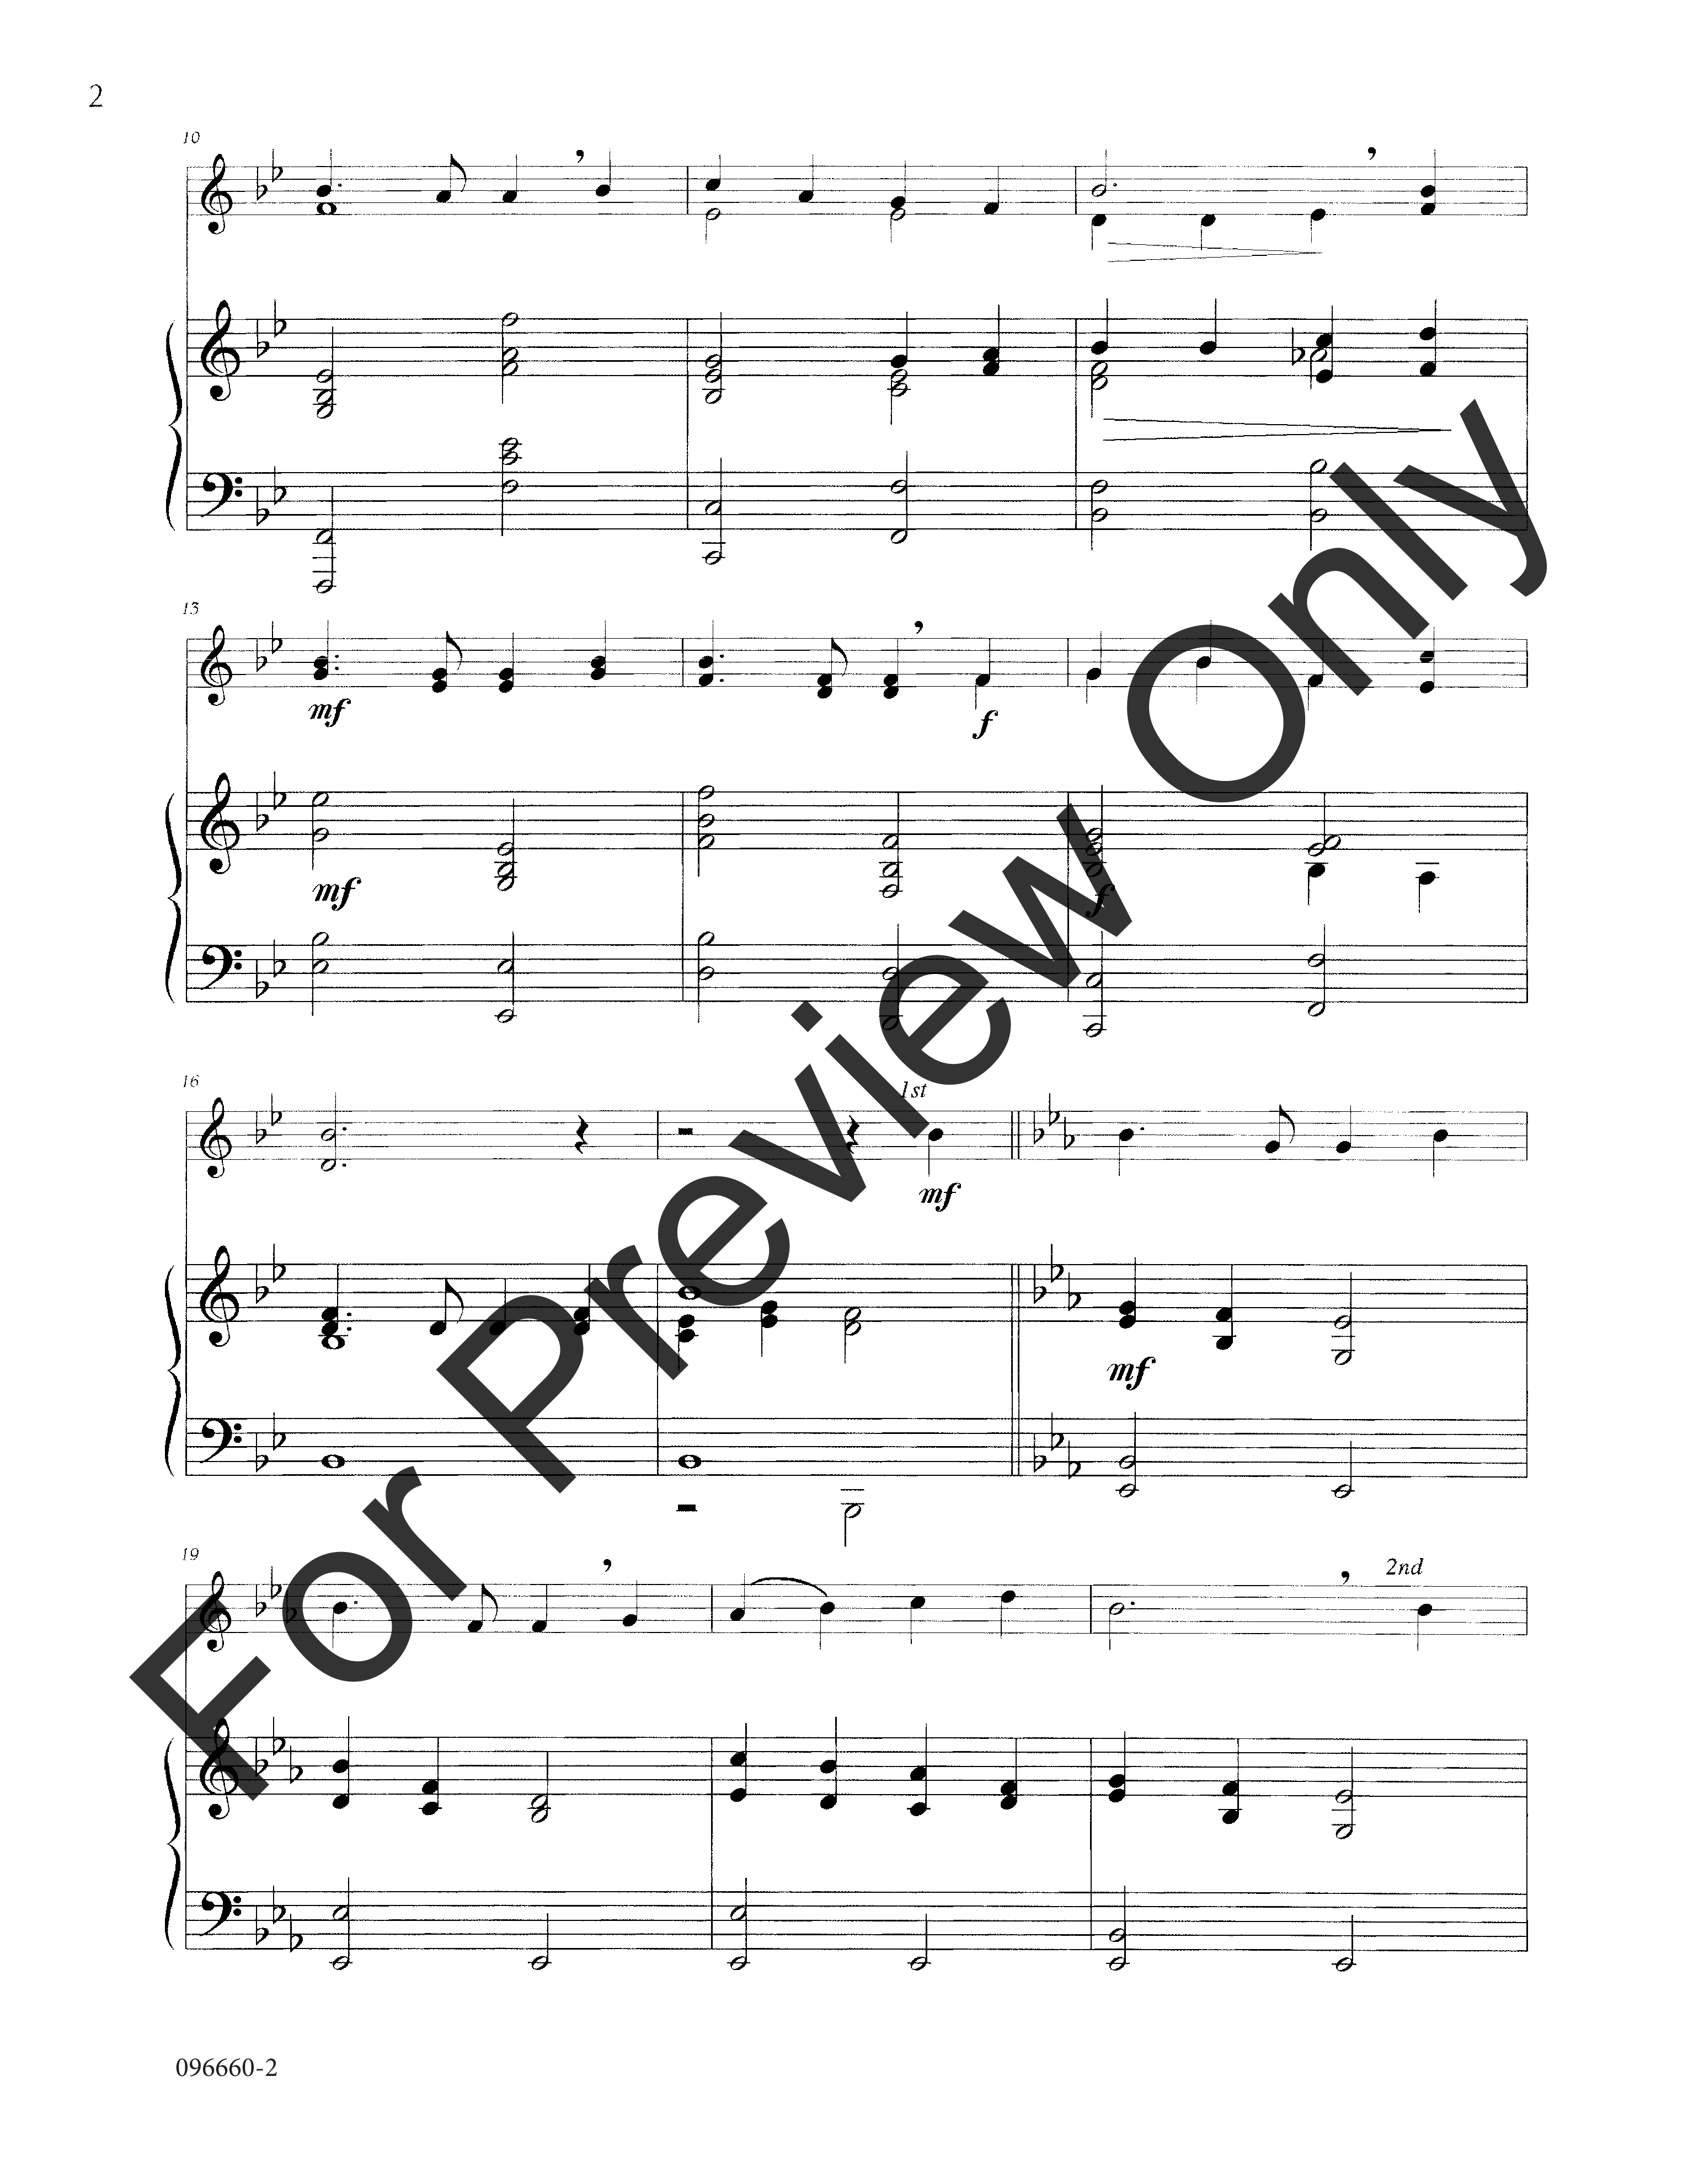 O Beautiful for Spacious Skies B-flat Instrument Solo, opt. Duet and Piano -P.O.P.